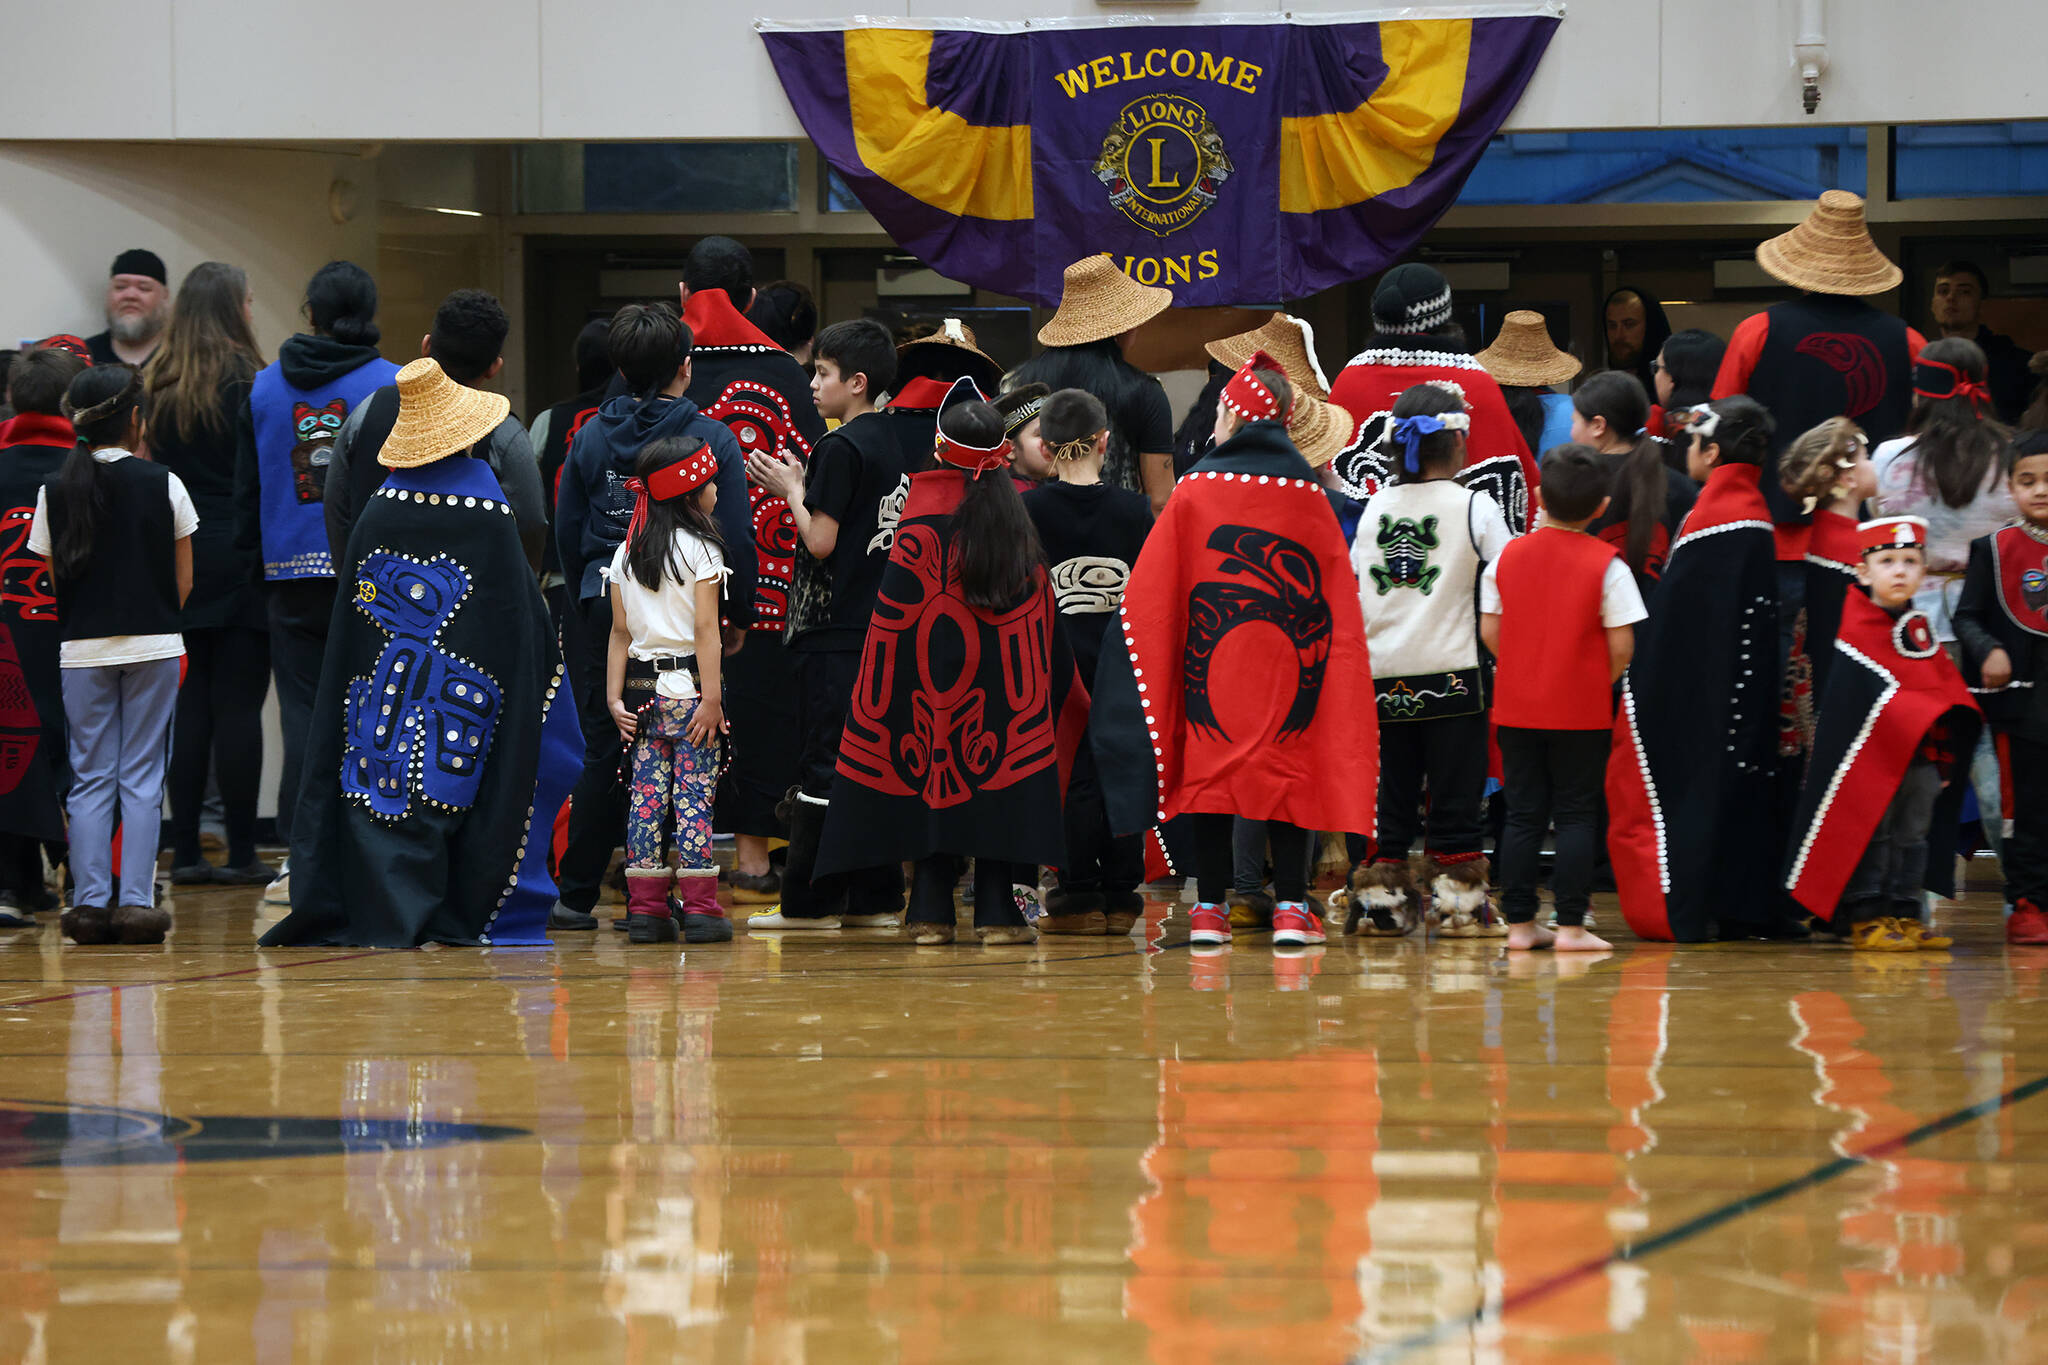 Dancers, including the Eagle Raven Dancers, Wooshji.een and students in the TCLL Program, stand in between songs Thursday evening during a performance ahead of a Gold Medal Basketball Tournament game between Juneau and Hydaburg. (Ben Hohenstatt / Juneau Empire)